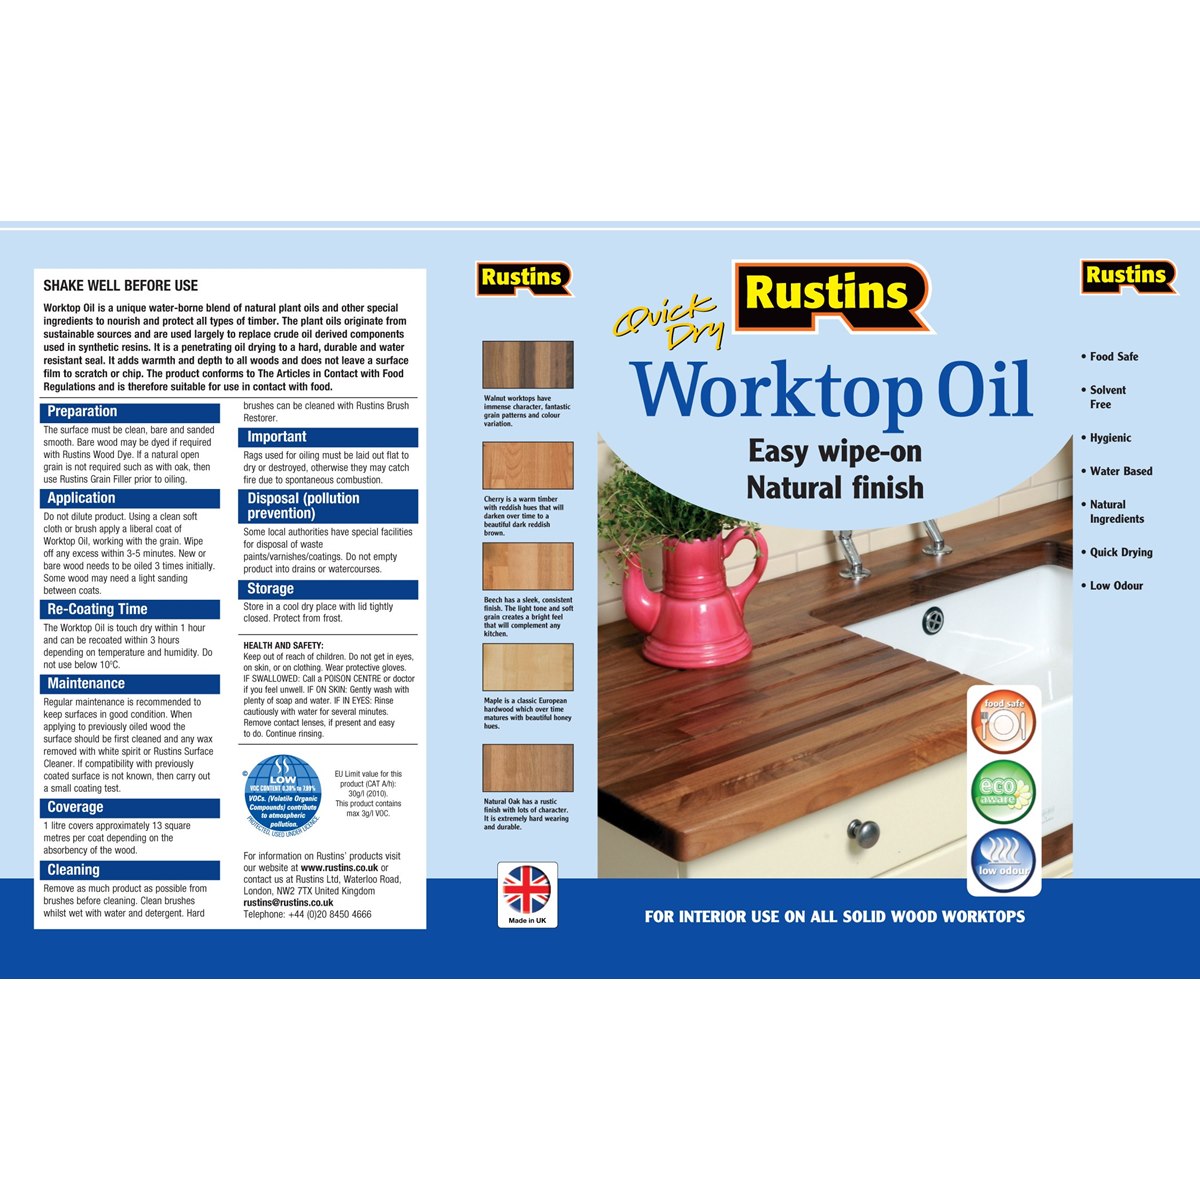 High Quality Oil for Wooden Worktops